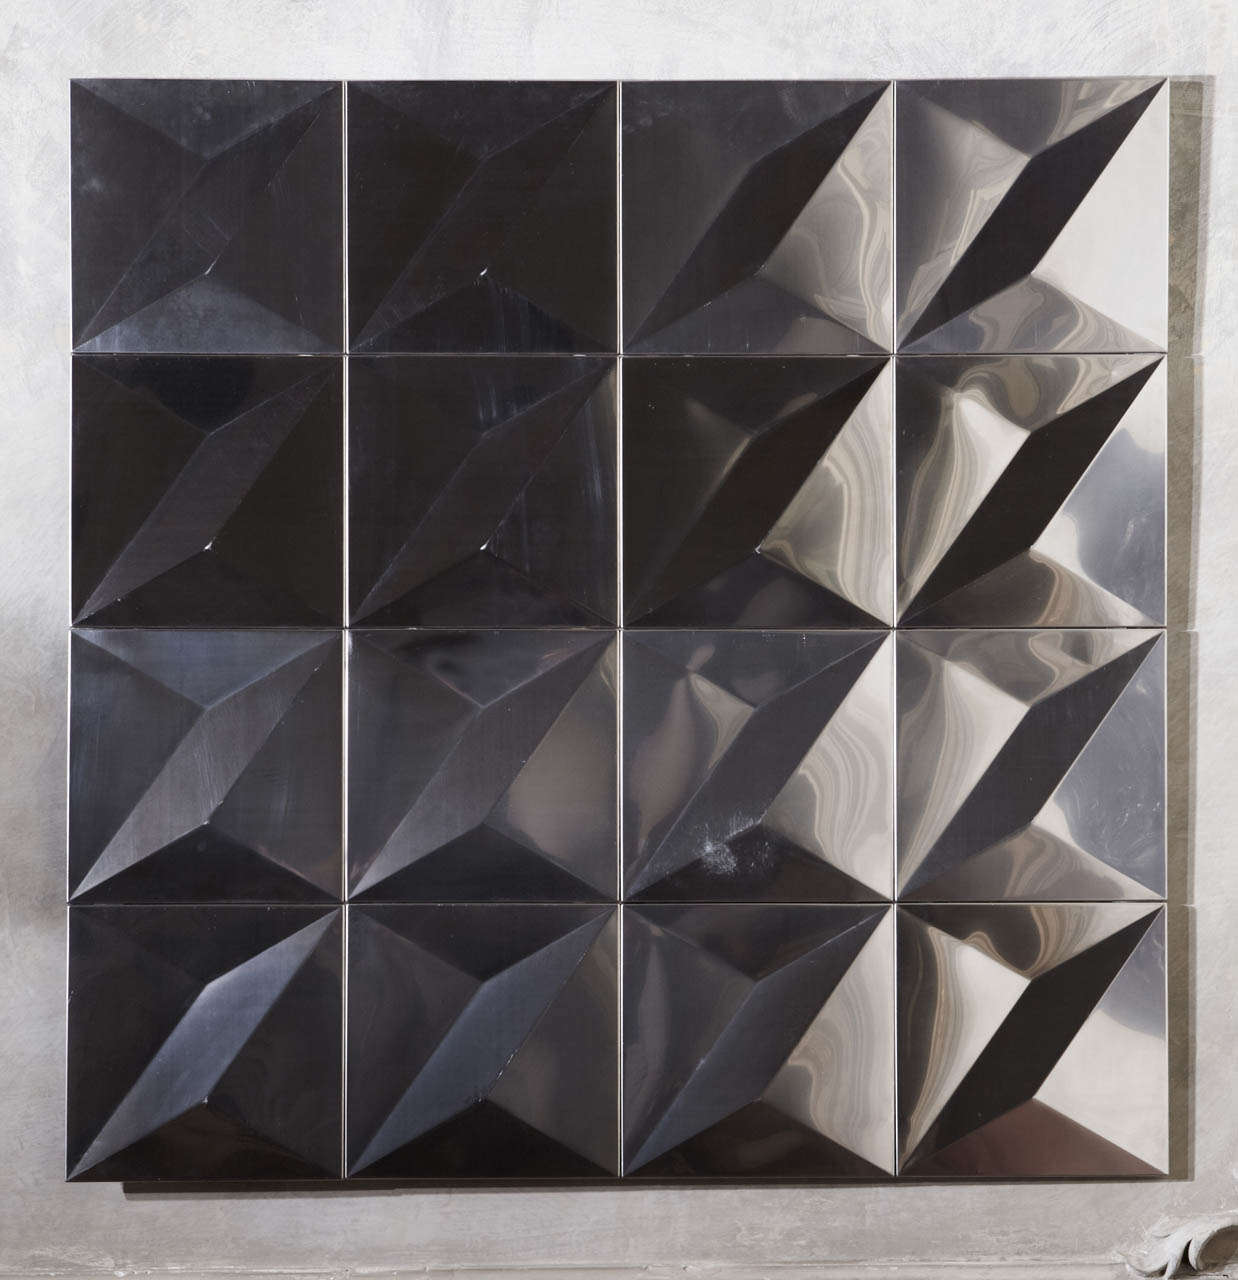 Wall decorative panel composed by 16 stainless steel panels